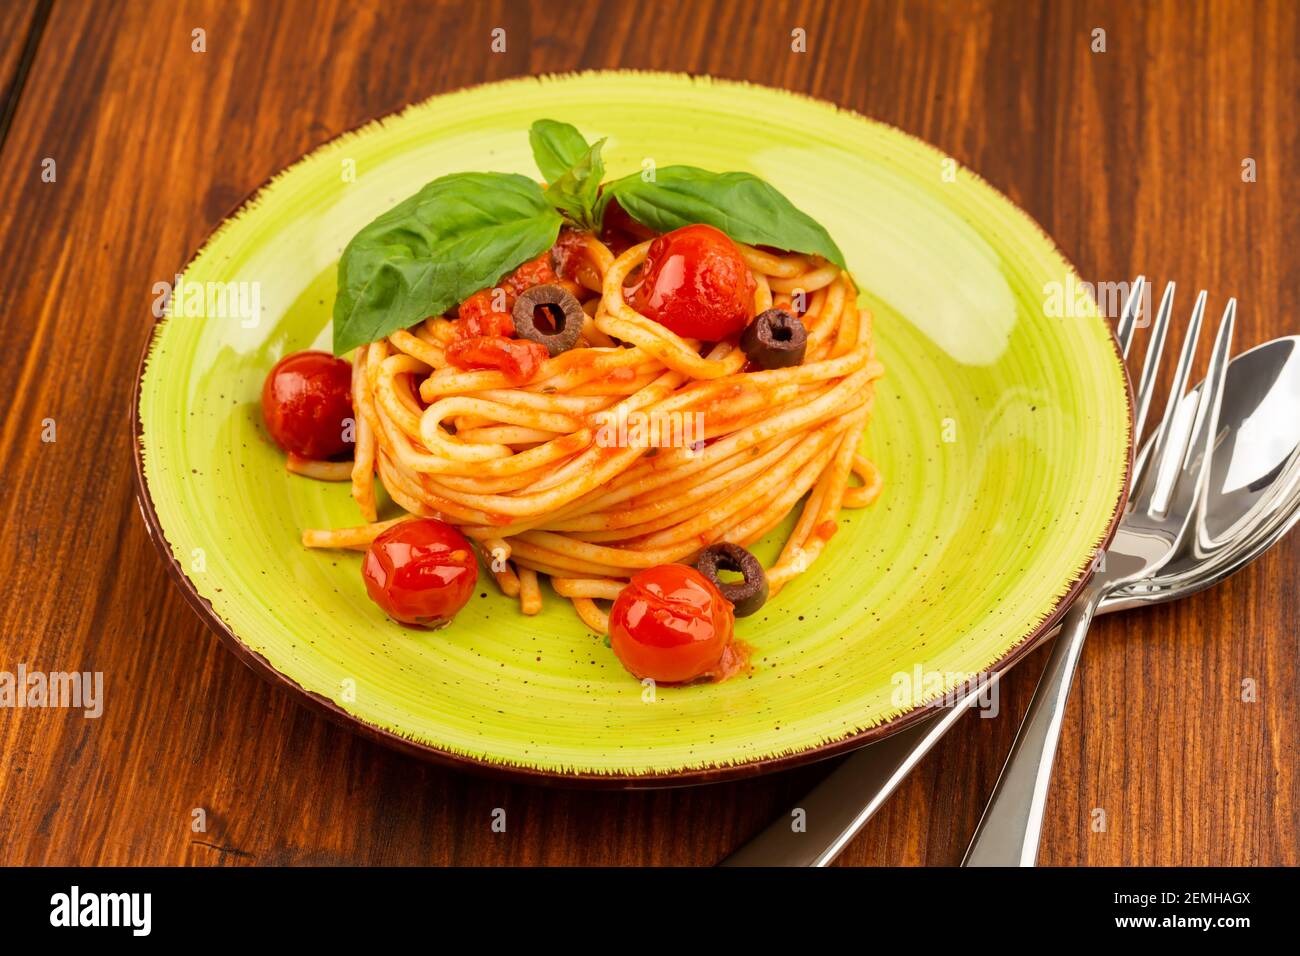 Pasta spaghetti Napoli or Napolitana on green plate with fork and spoon on brown background. Italian cuisine. Stock Photo